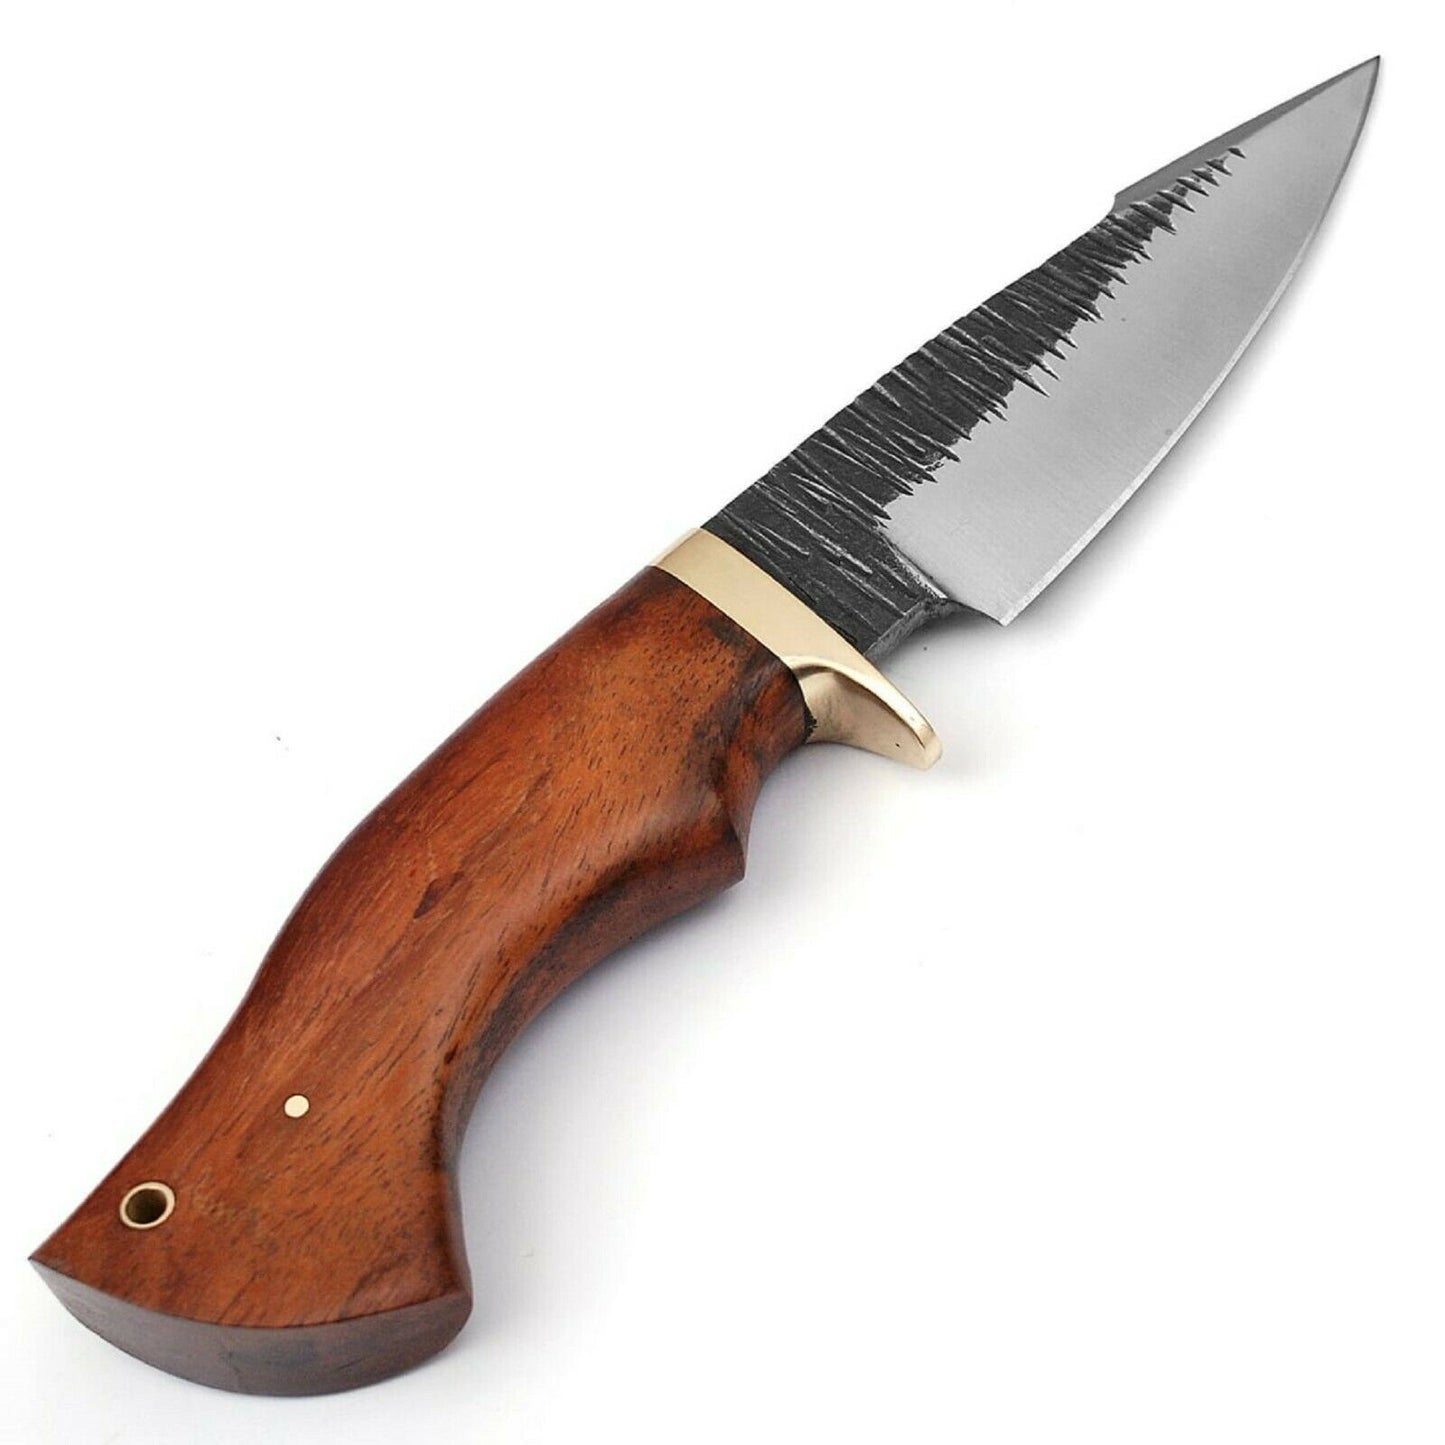 10" HAND FORGED High Carbon Steel Skinner Hunting Knife Wood Handle with Sheath